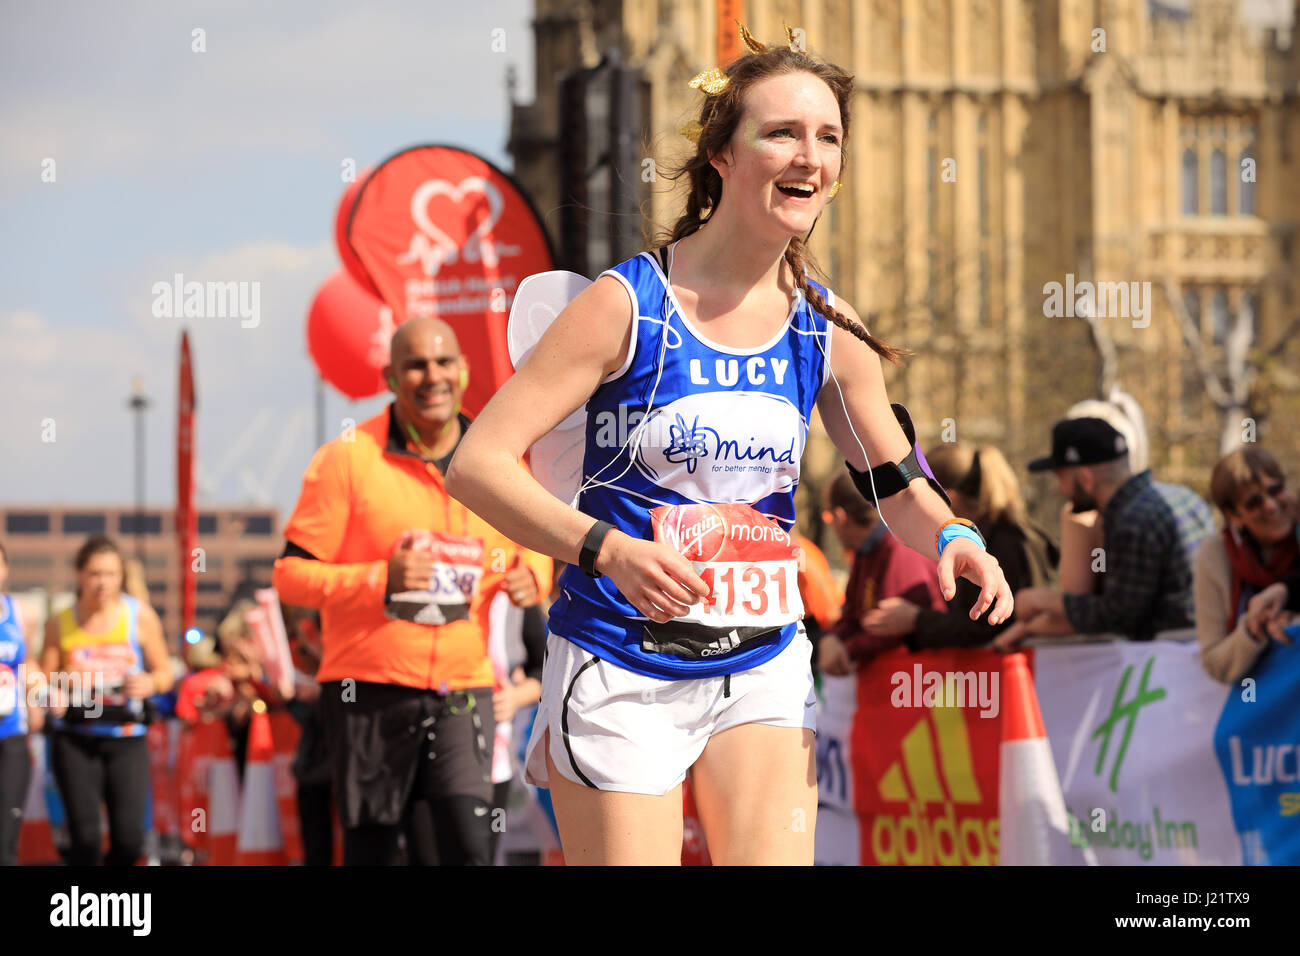 London, UK. 23rd April, 2017. Participants take part in the Virgin London Marathon 2017. Pictured in Westminster next to Parliament and Big Ben Credit: Oliver Dixon/Alamy Live News Stock Photo